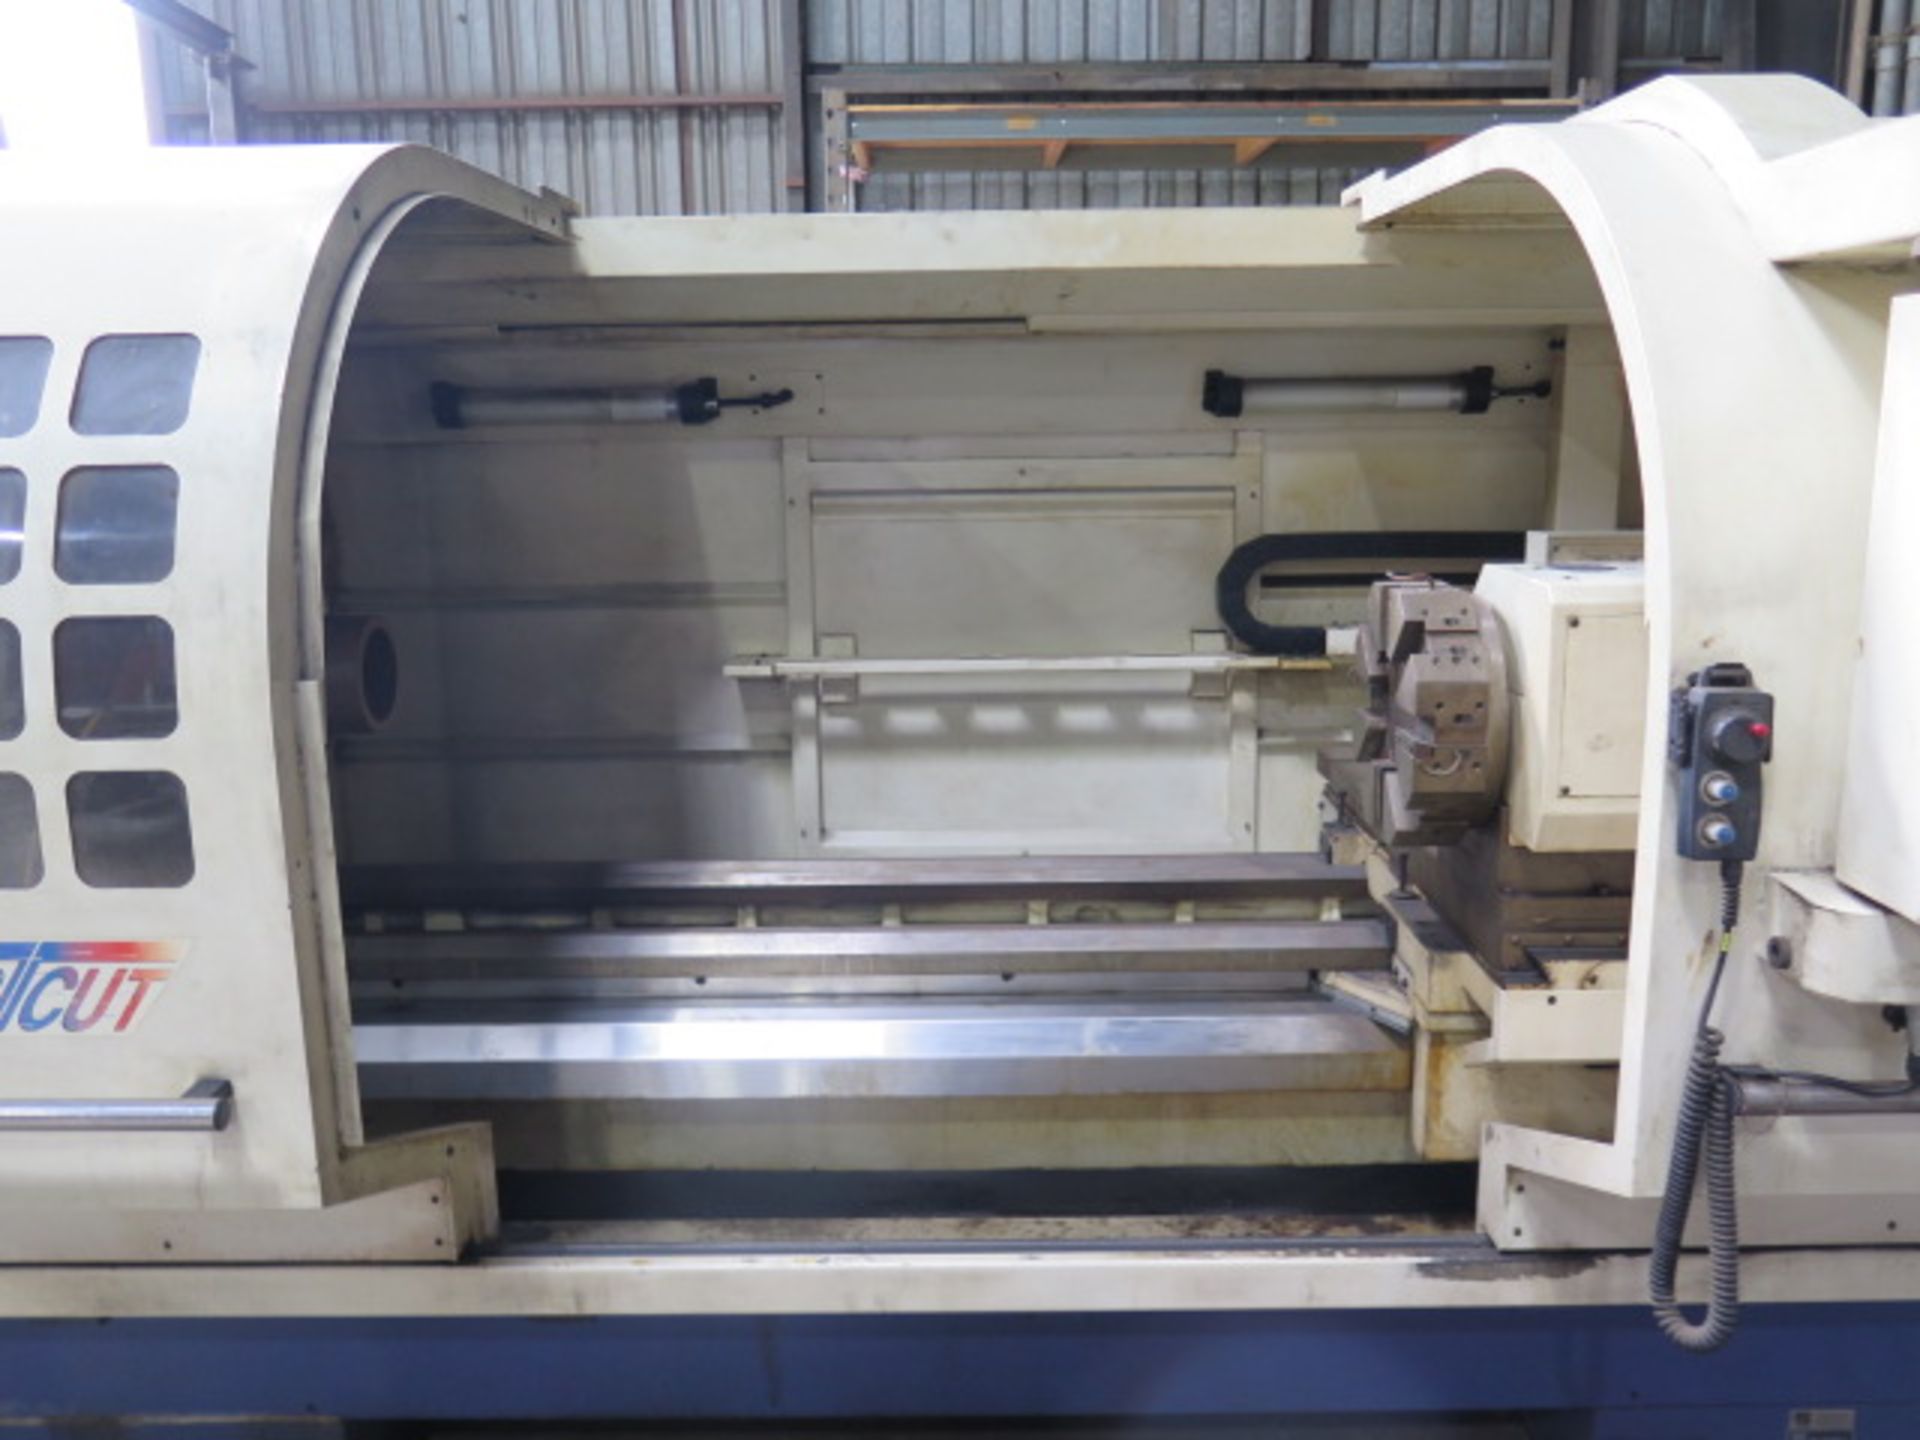 Summit “Smart Cut” SC30-9X80M Big Bore CNC Turning Center,Fagor Controls, 9” Spindle Bore,SOLD AS IS - Image 4 of 26